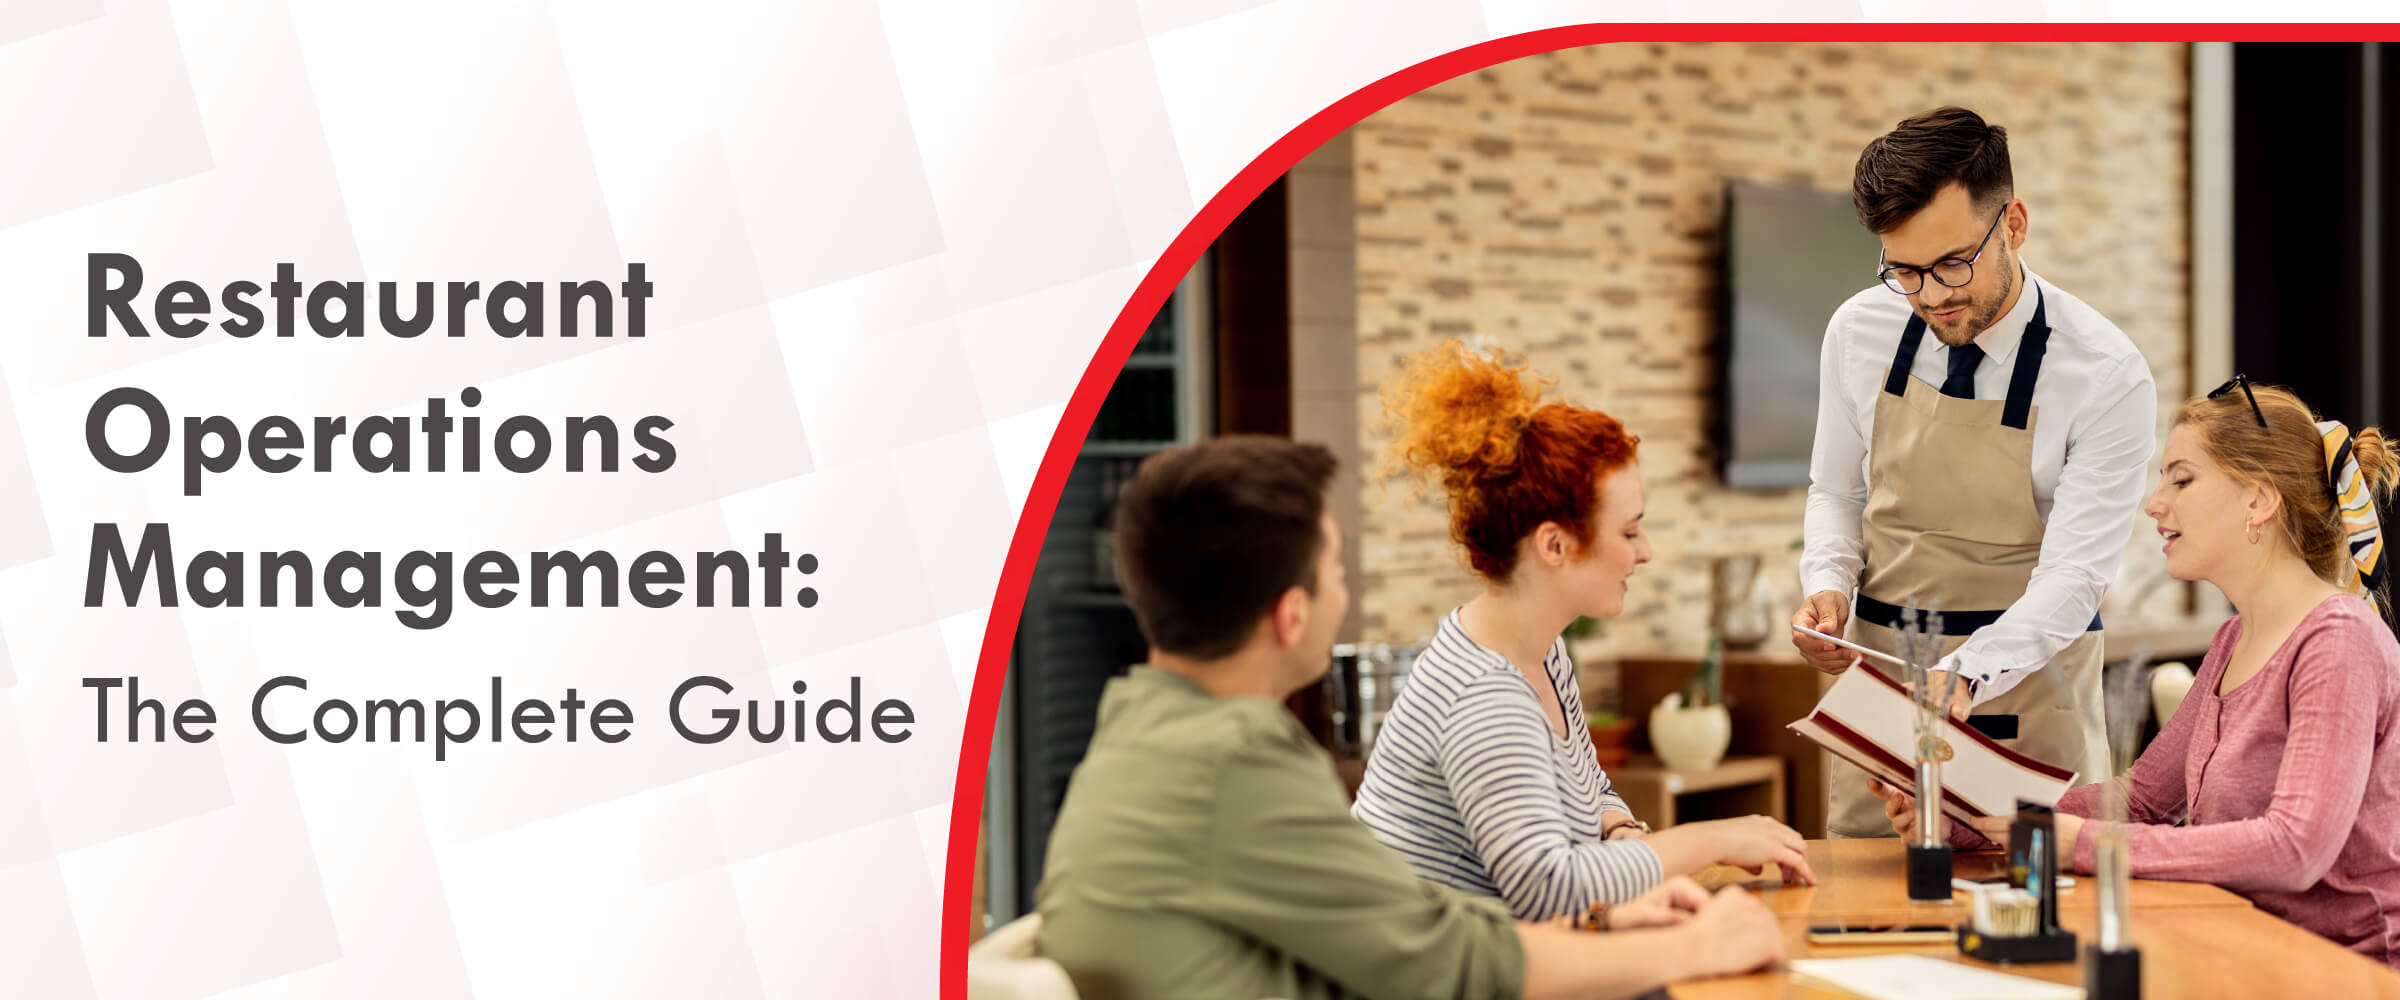 Restaurant Operations Management The Complete Guide